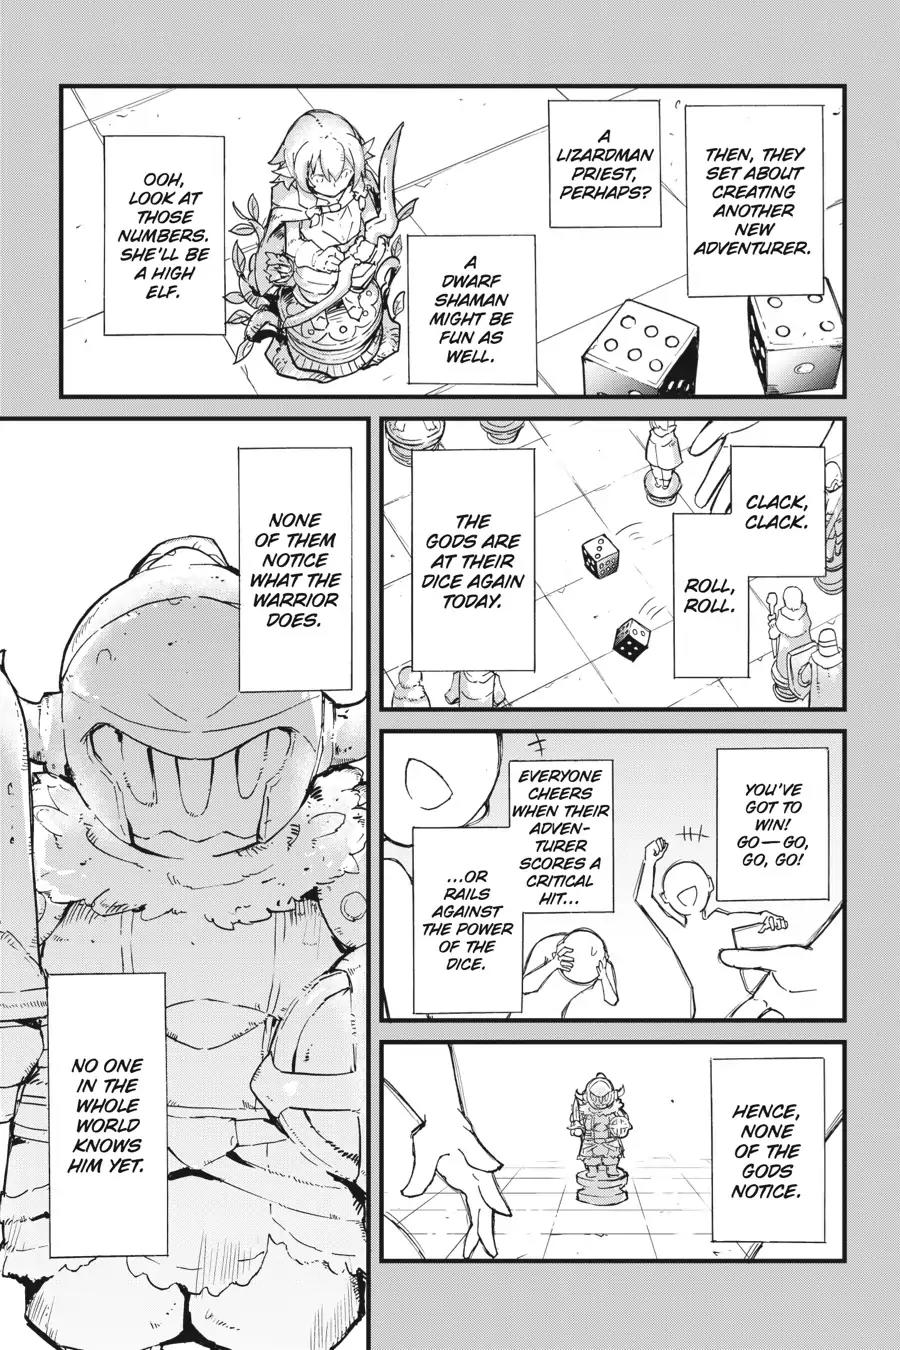 Goblin Slayer: Side Story Year One Vol.1 Chapter 20.5